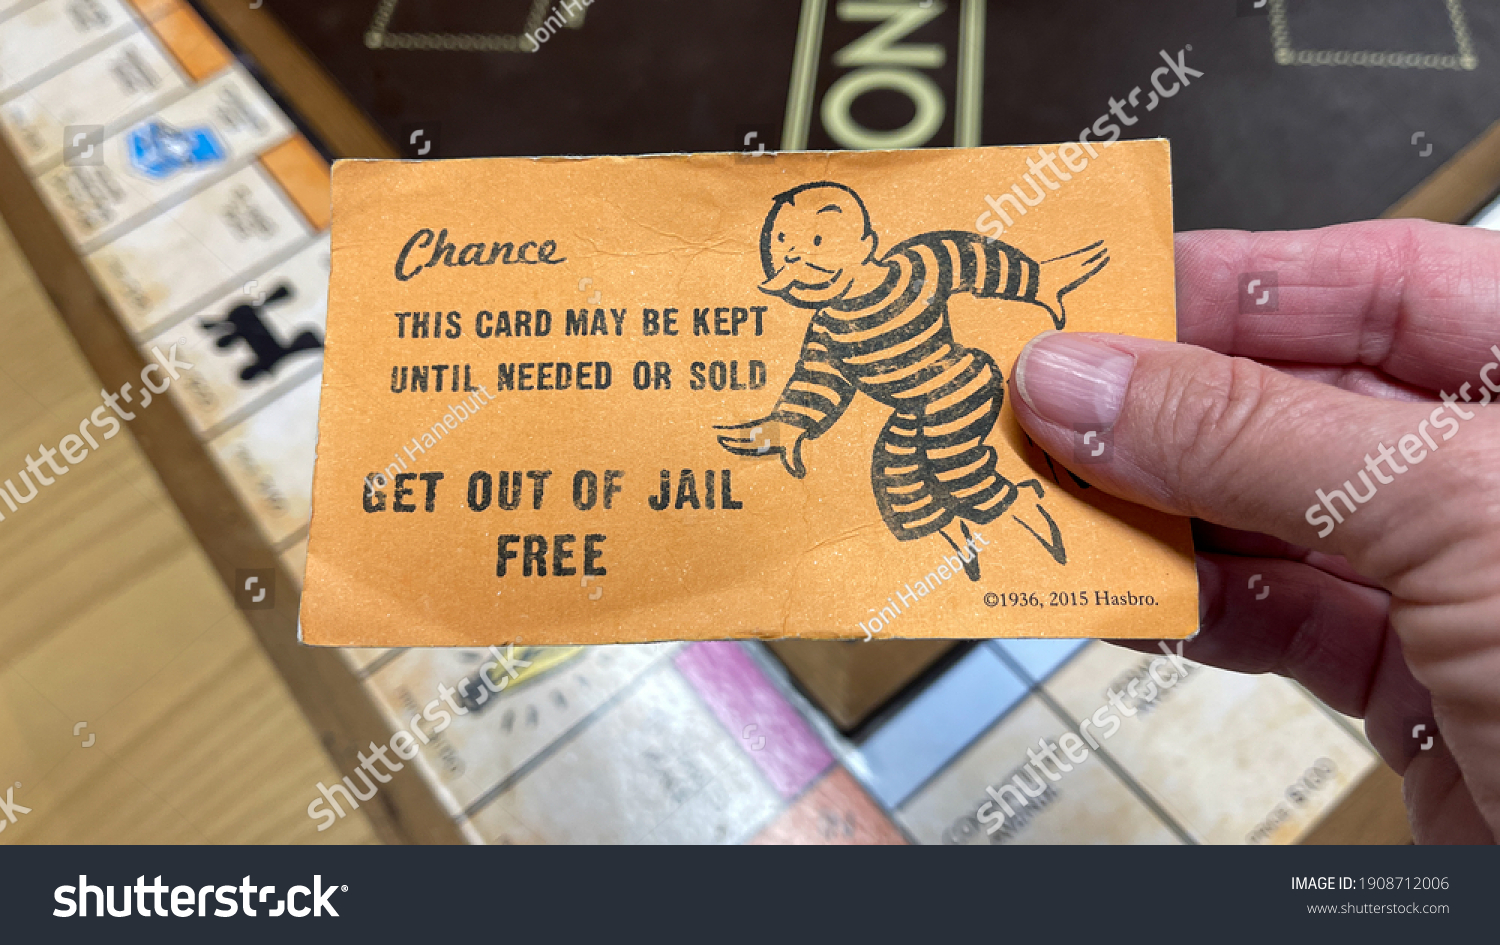 Presidential pardon Images, Stock Photos & Vectors  Shutterstock Inside Get Out Of Jail Free Card Template